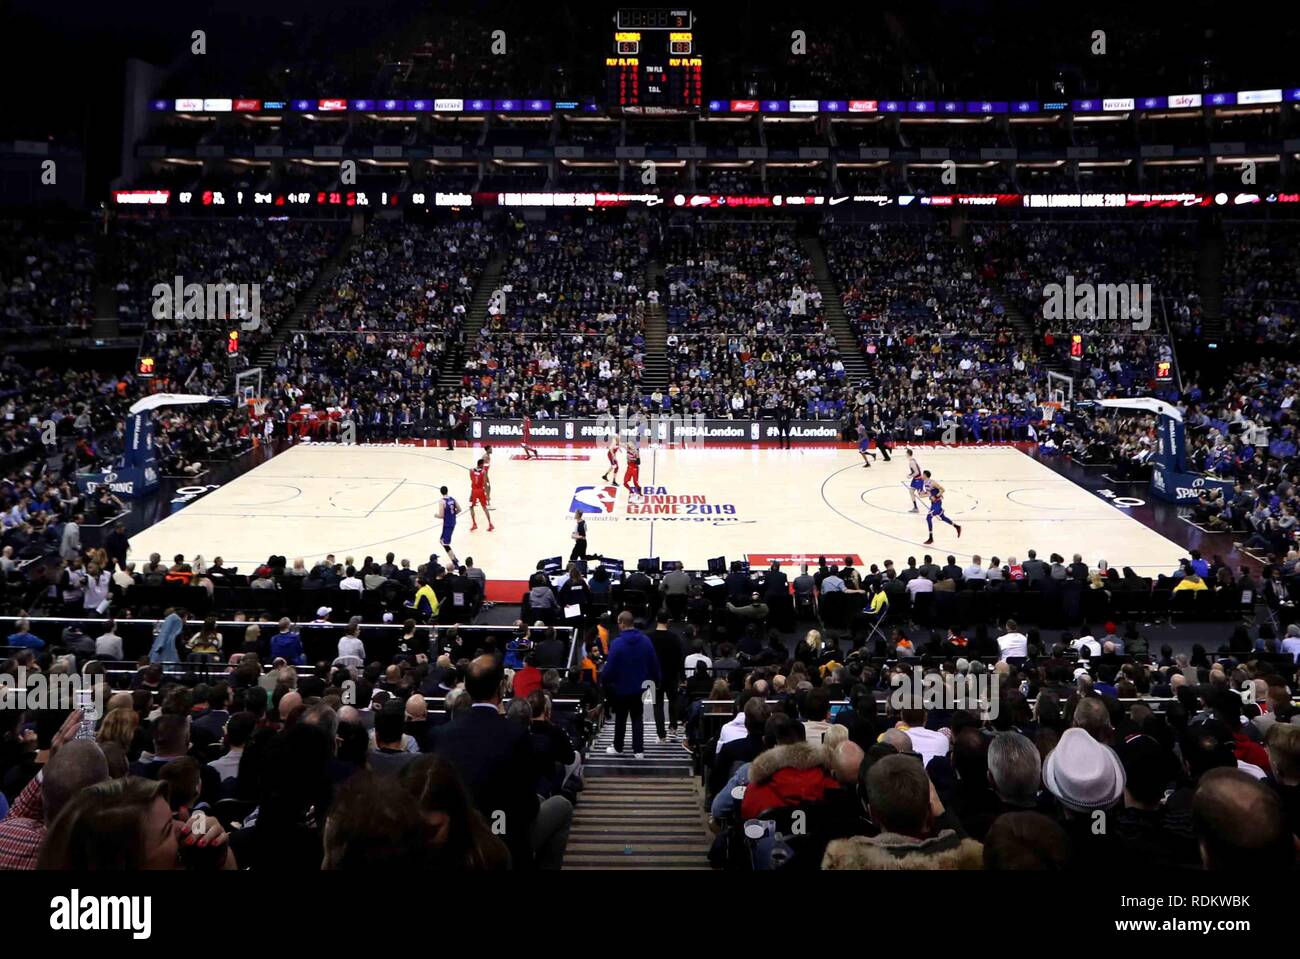 General view of the action during the NBA London Game 2019 at the O2 Arena, London Stock Photo